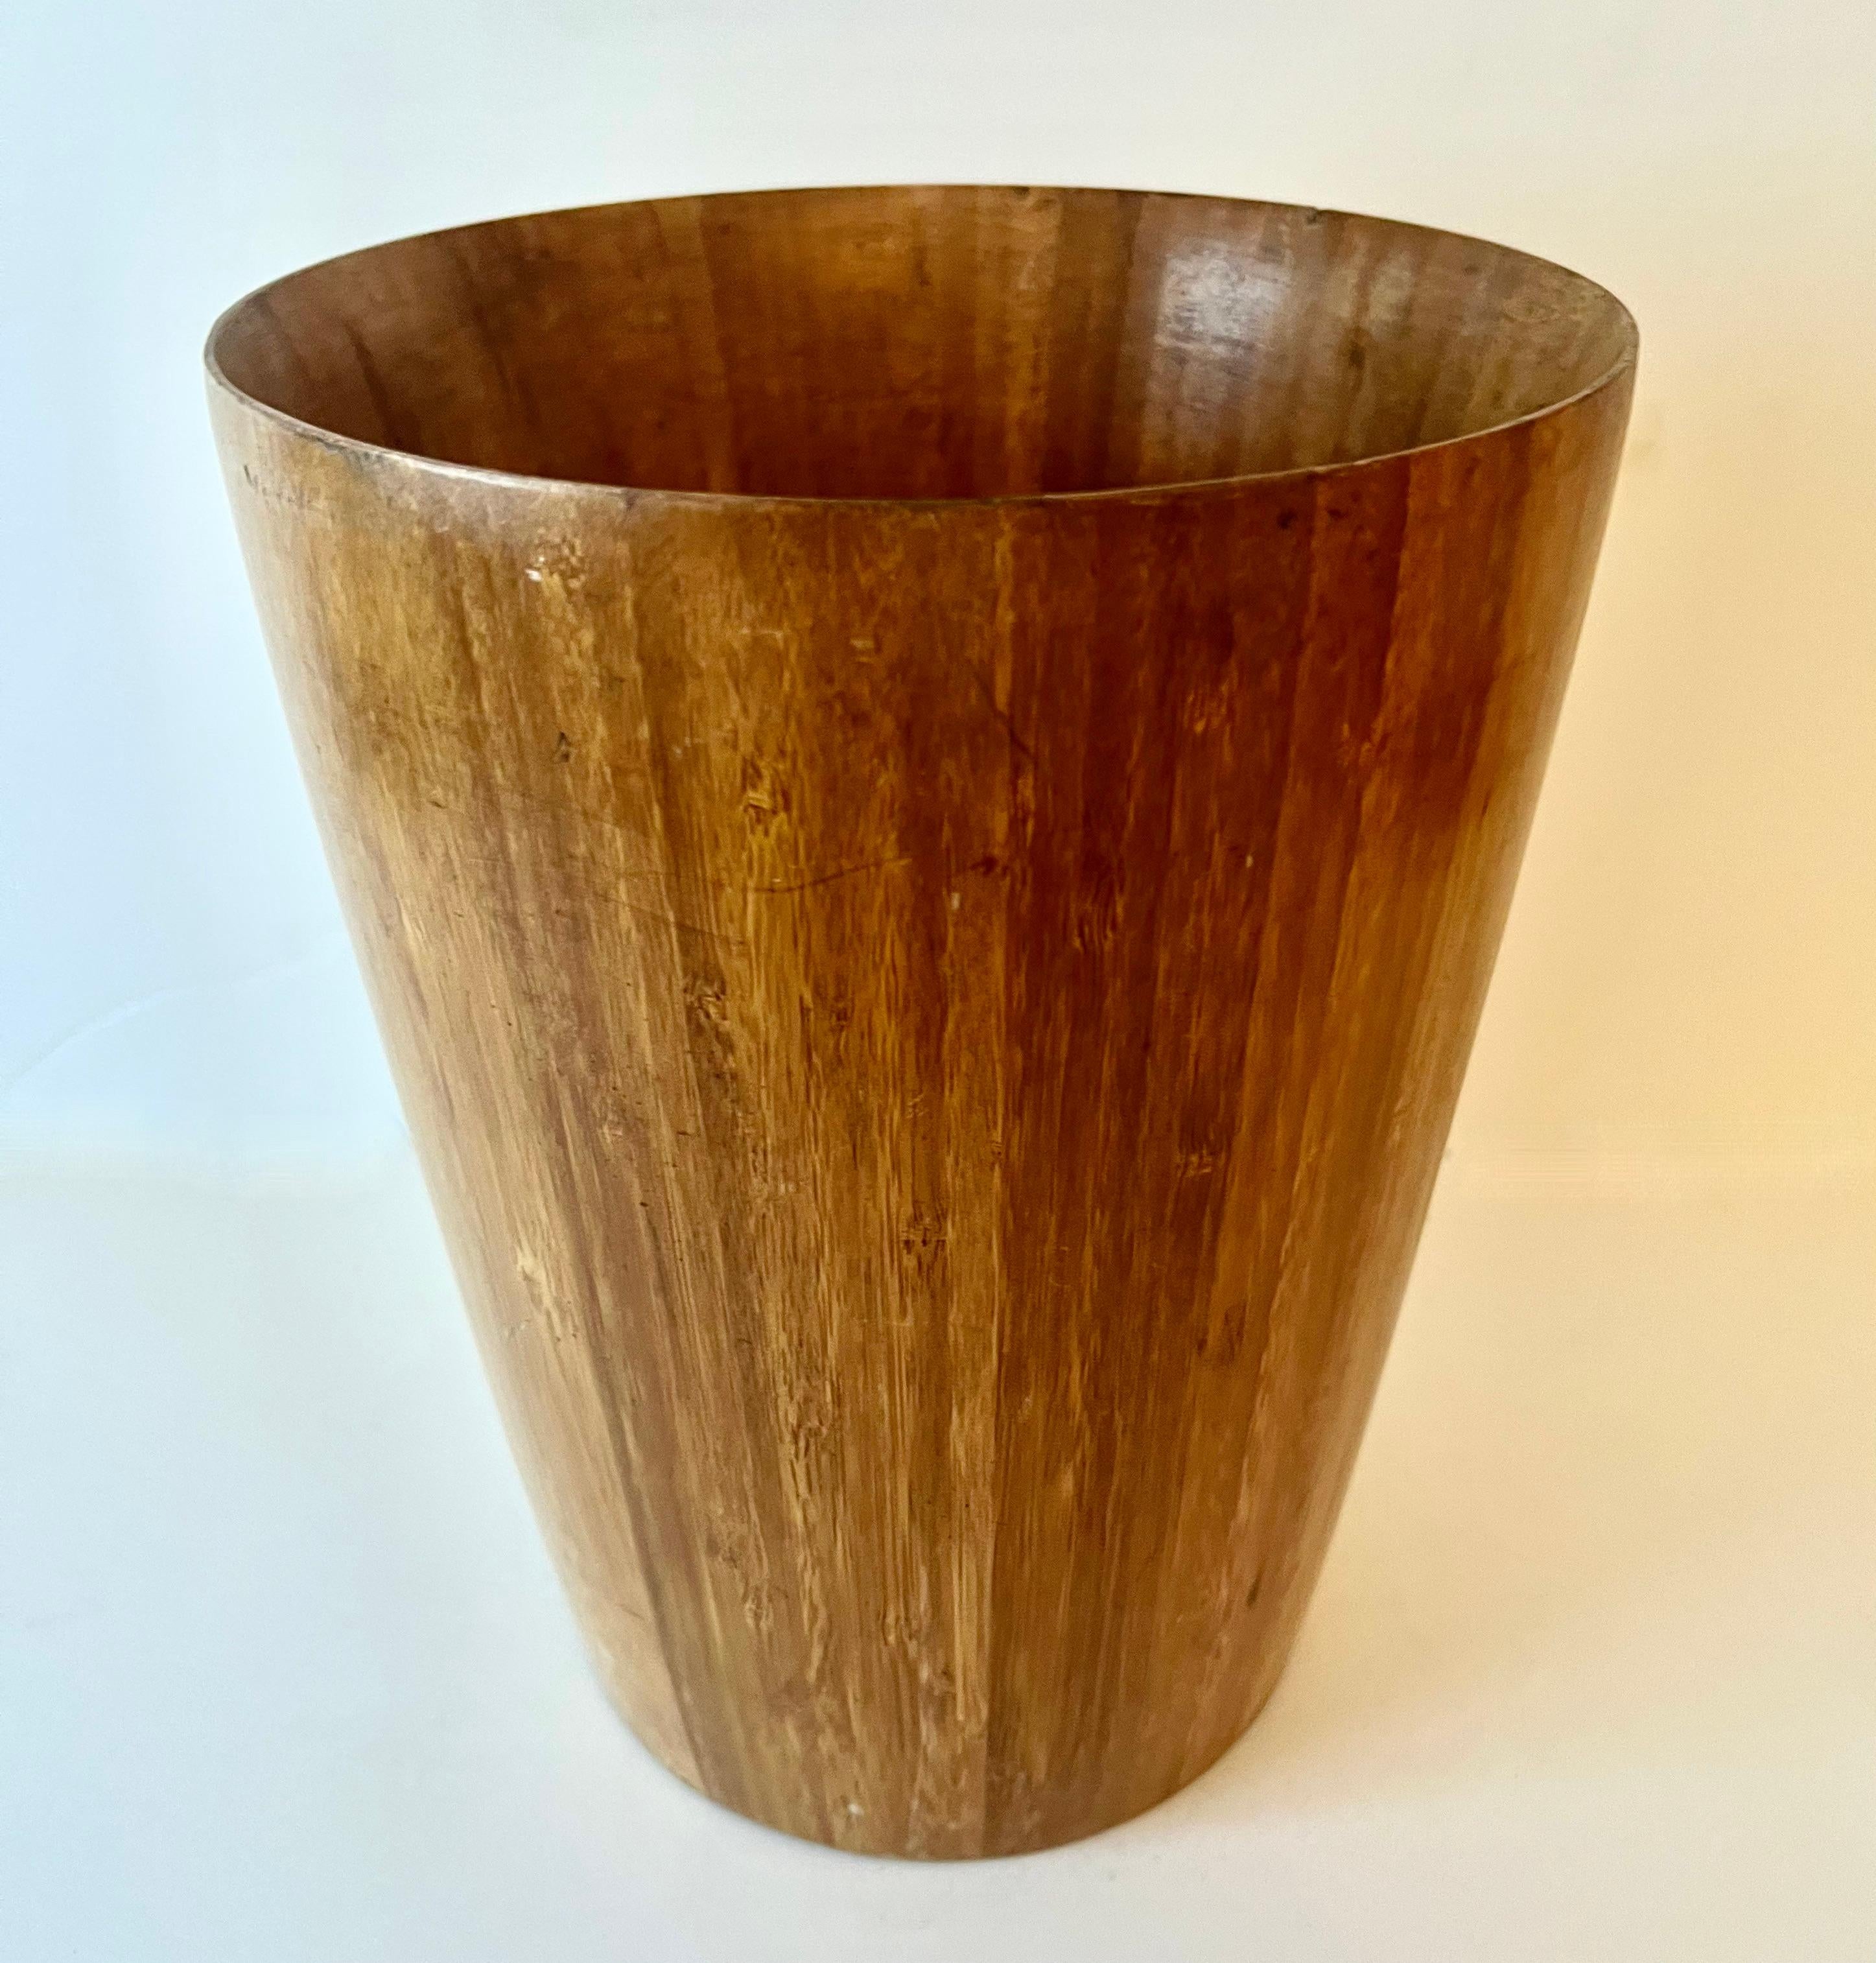 A wooden waste can or waste bin.  A compliment to many space and especially next to a desk or work station.  A very neutral and simple design - the wood is striated and beautifully put together.  

A wonderfully simplistic piece for any room.  The